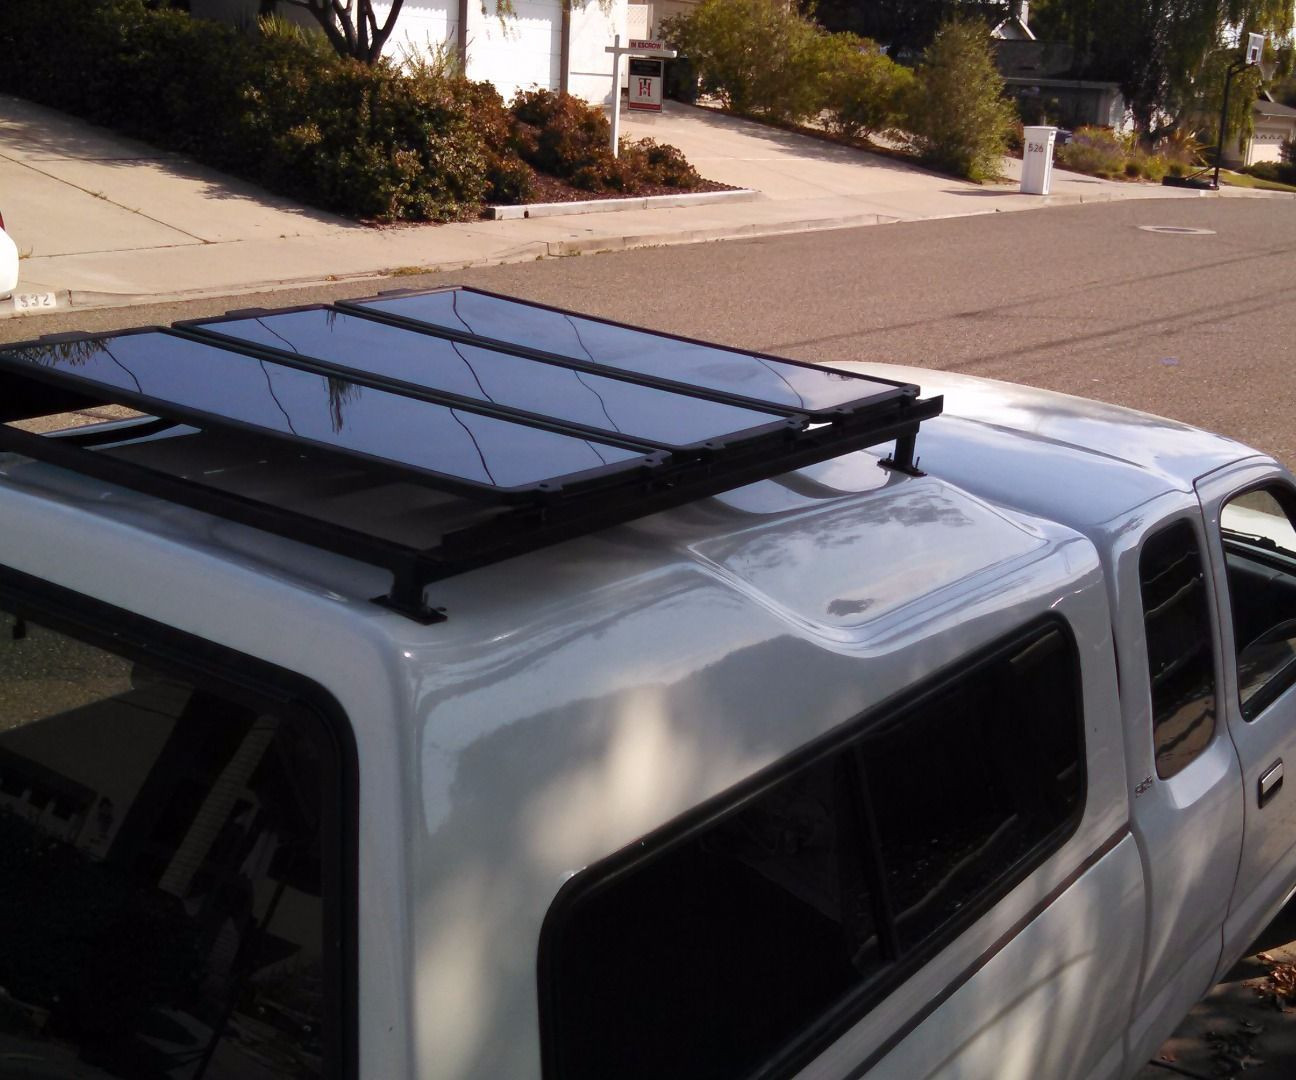 DIY Roof Rack With Full Plans
 Installing a DIY roof rack for solar panels